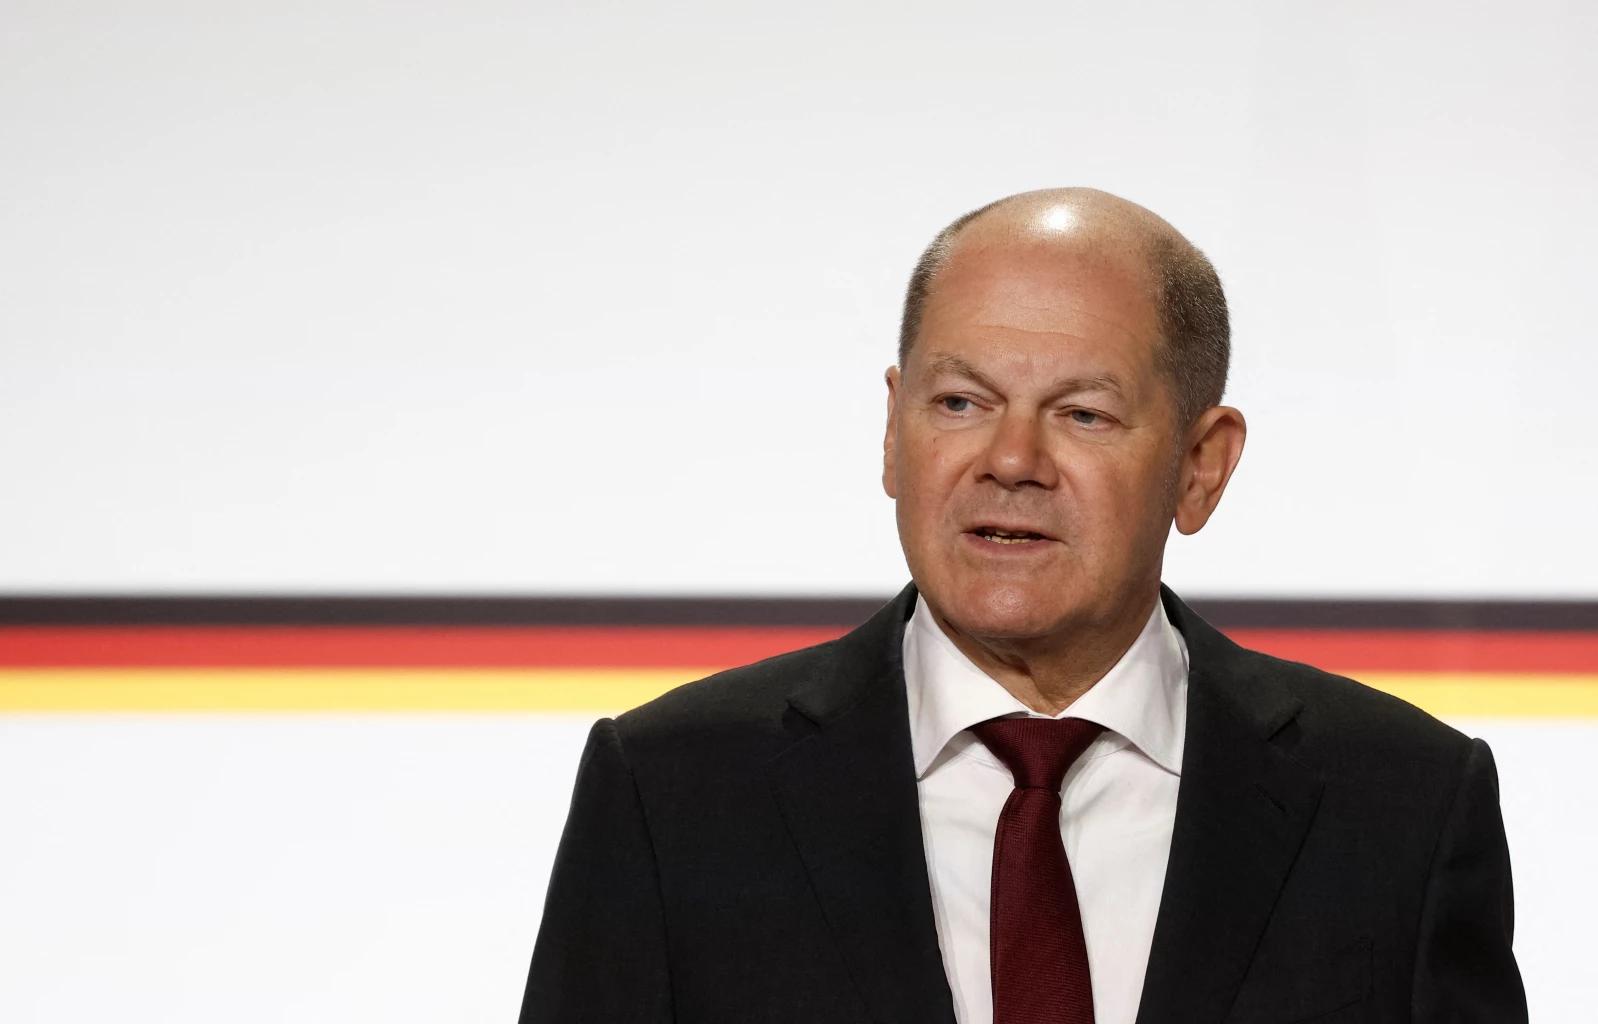 Germany will coordinate with allies on Ukraine weapons decisions - Scholz